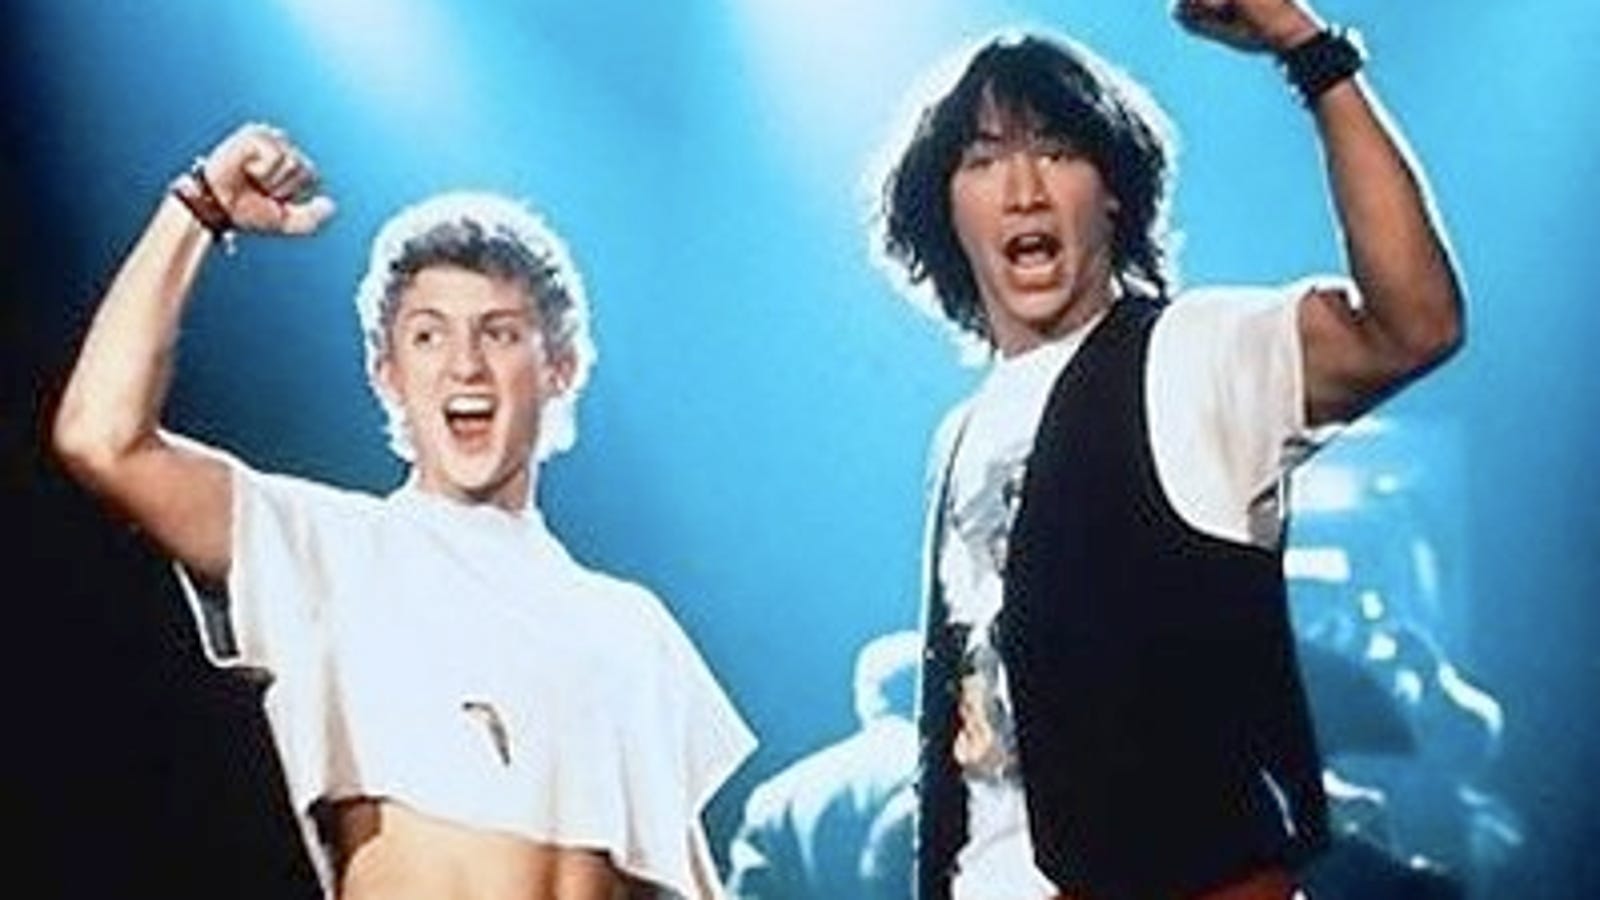 A Flood Of 80s Comedy Remakes, From Big To Bill And Ted1600 x 900